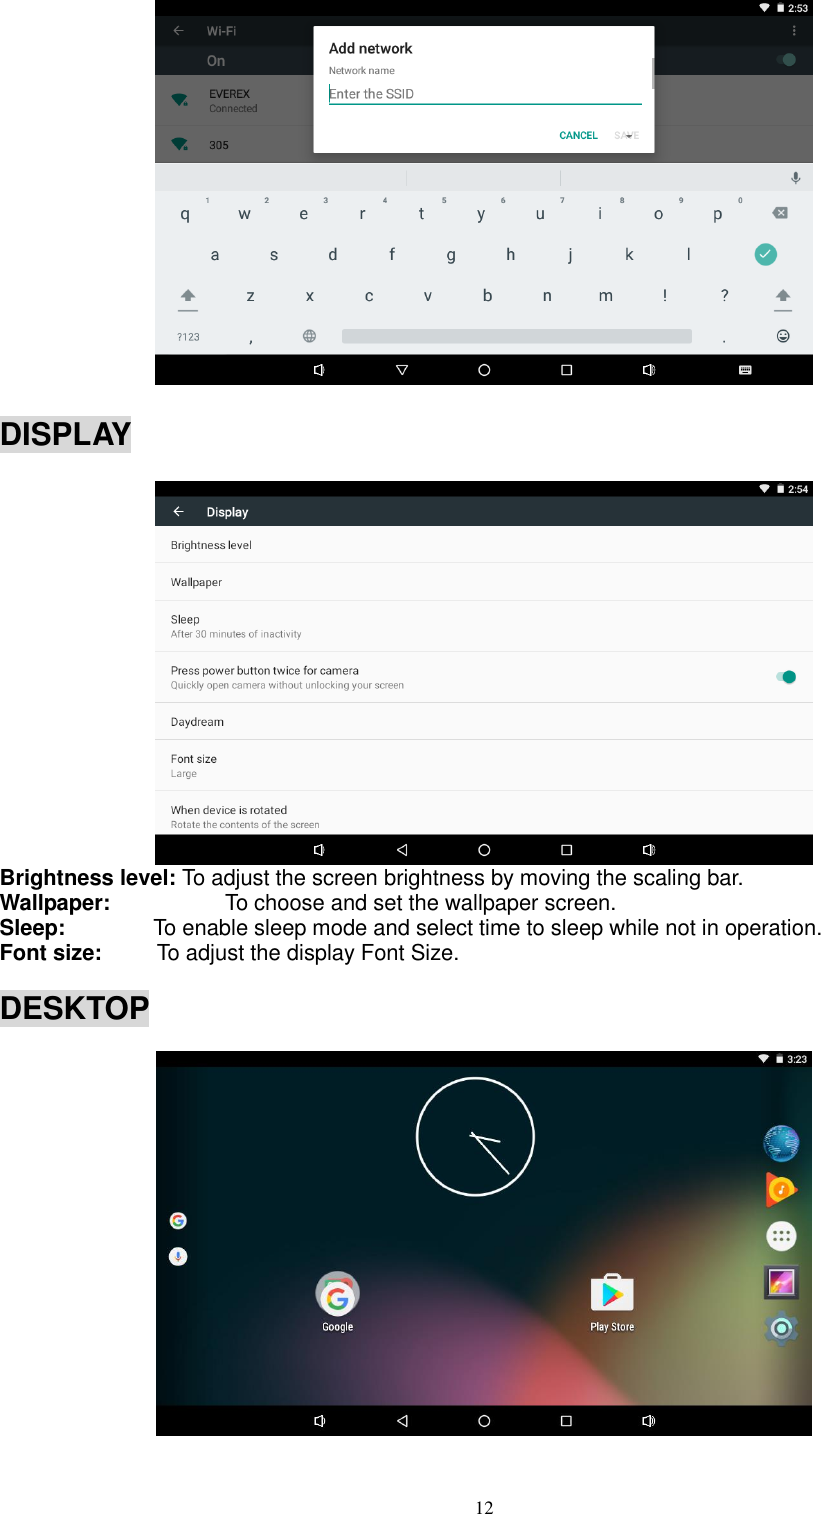  12     DISPLAY                                                                          Brightness level: To adjust the screen brightness by moving the scaling bar. Wallpaper:                    To choose and set the wallpaper screen. Sleep:         To enable sleep mode and select time to sleep while not in operation. Font size:      To adjust the display Font Size.  DESKTOP                                                                              